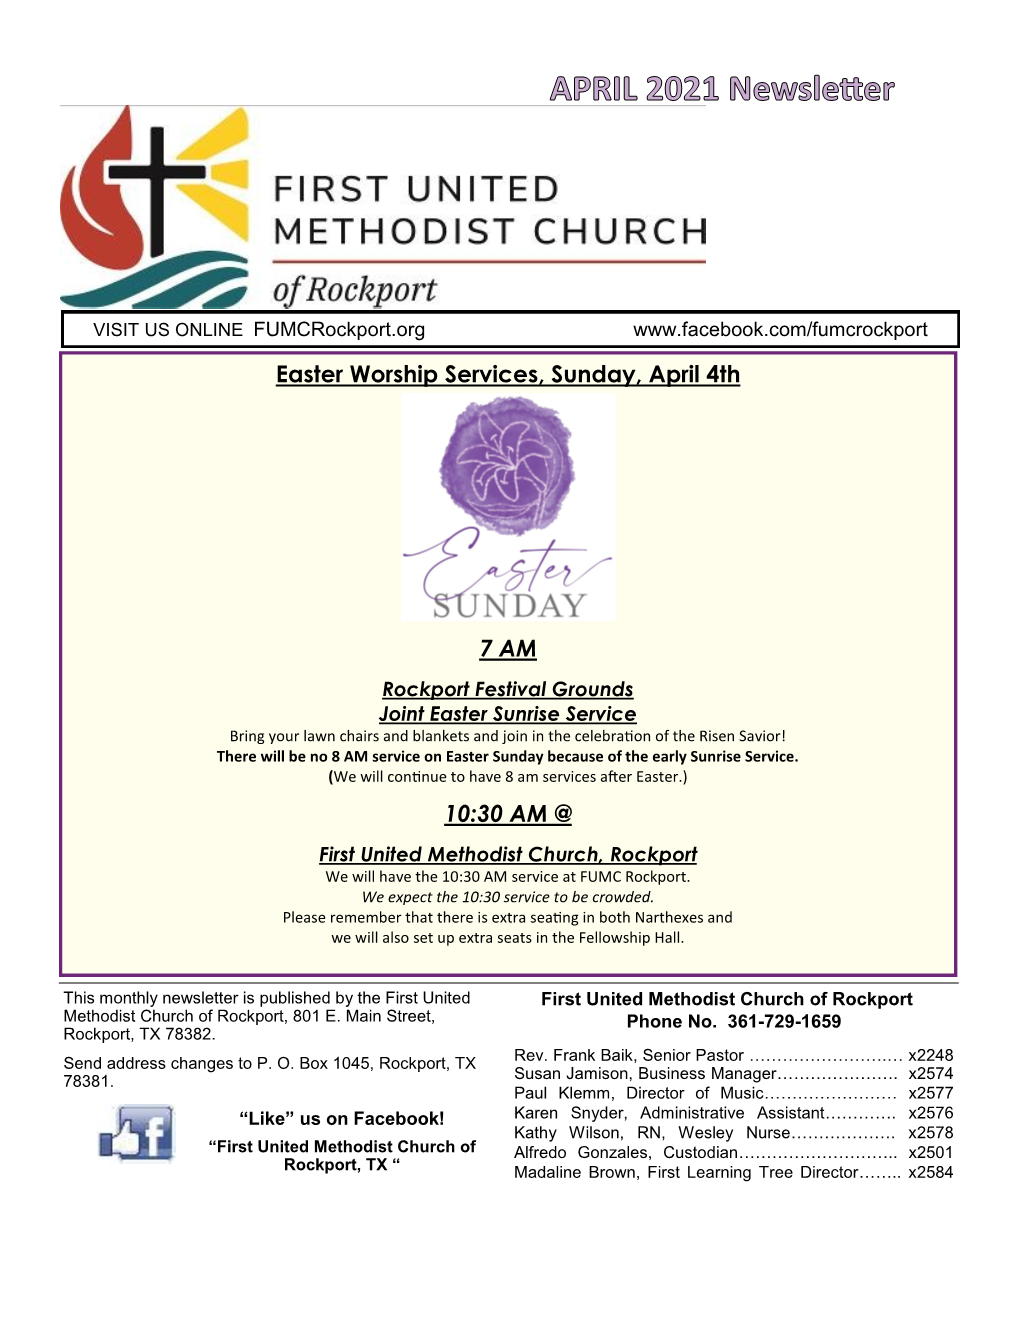 Easter Worship Services, Sunday, April 4Th 7 AM